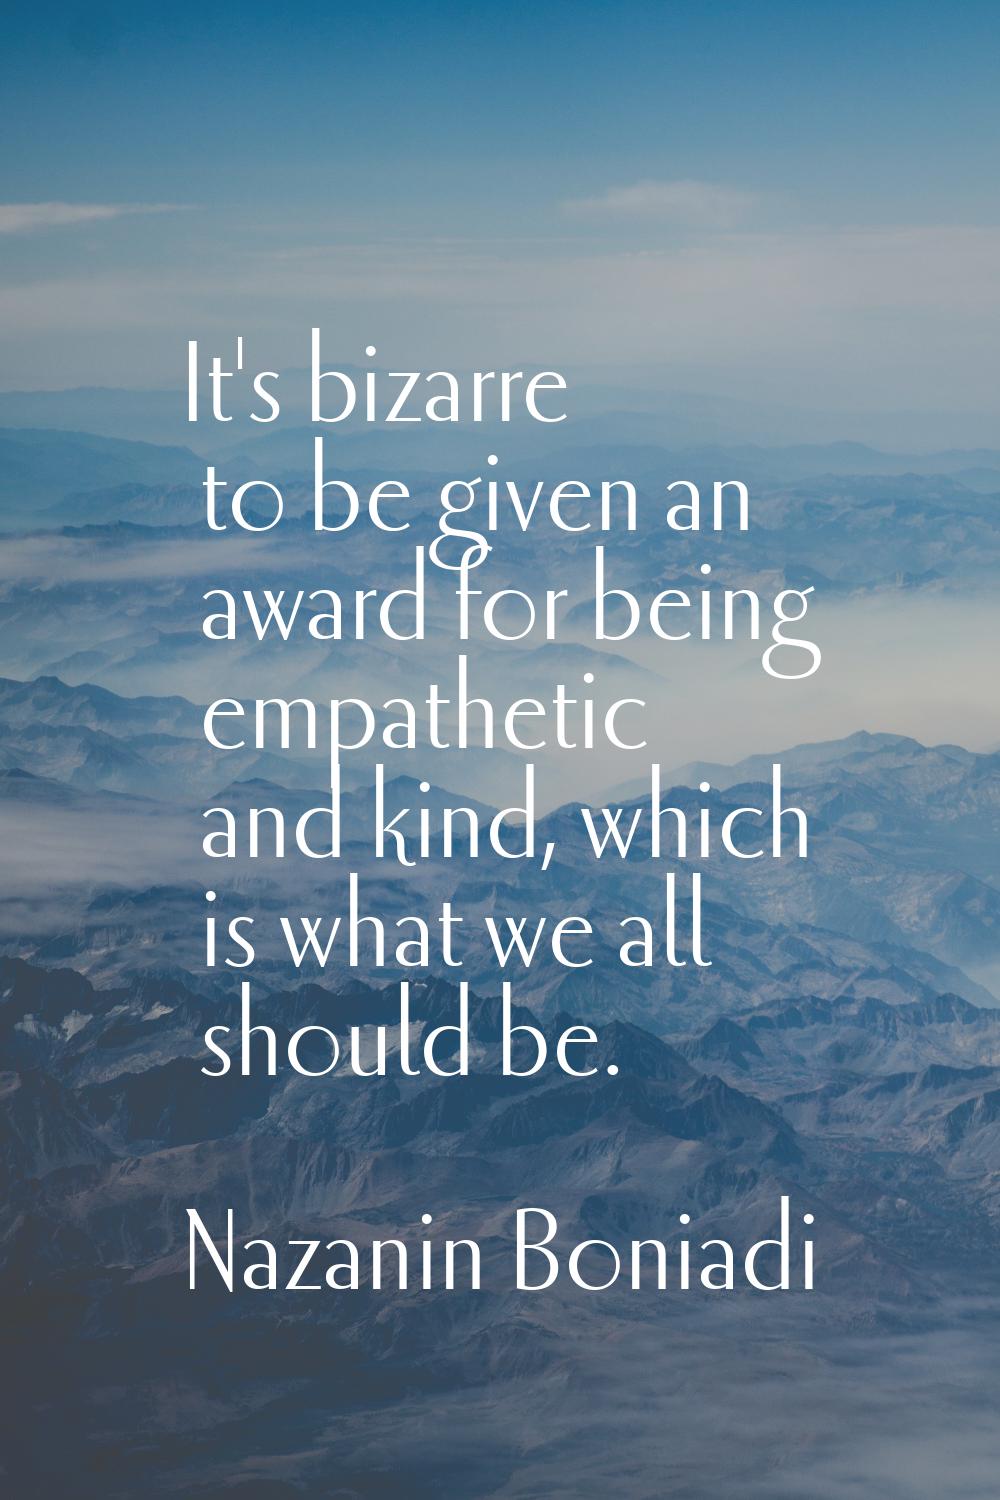 It's bizarre to be given an award for being empathetic and kind, which is what we all should be.